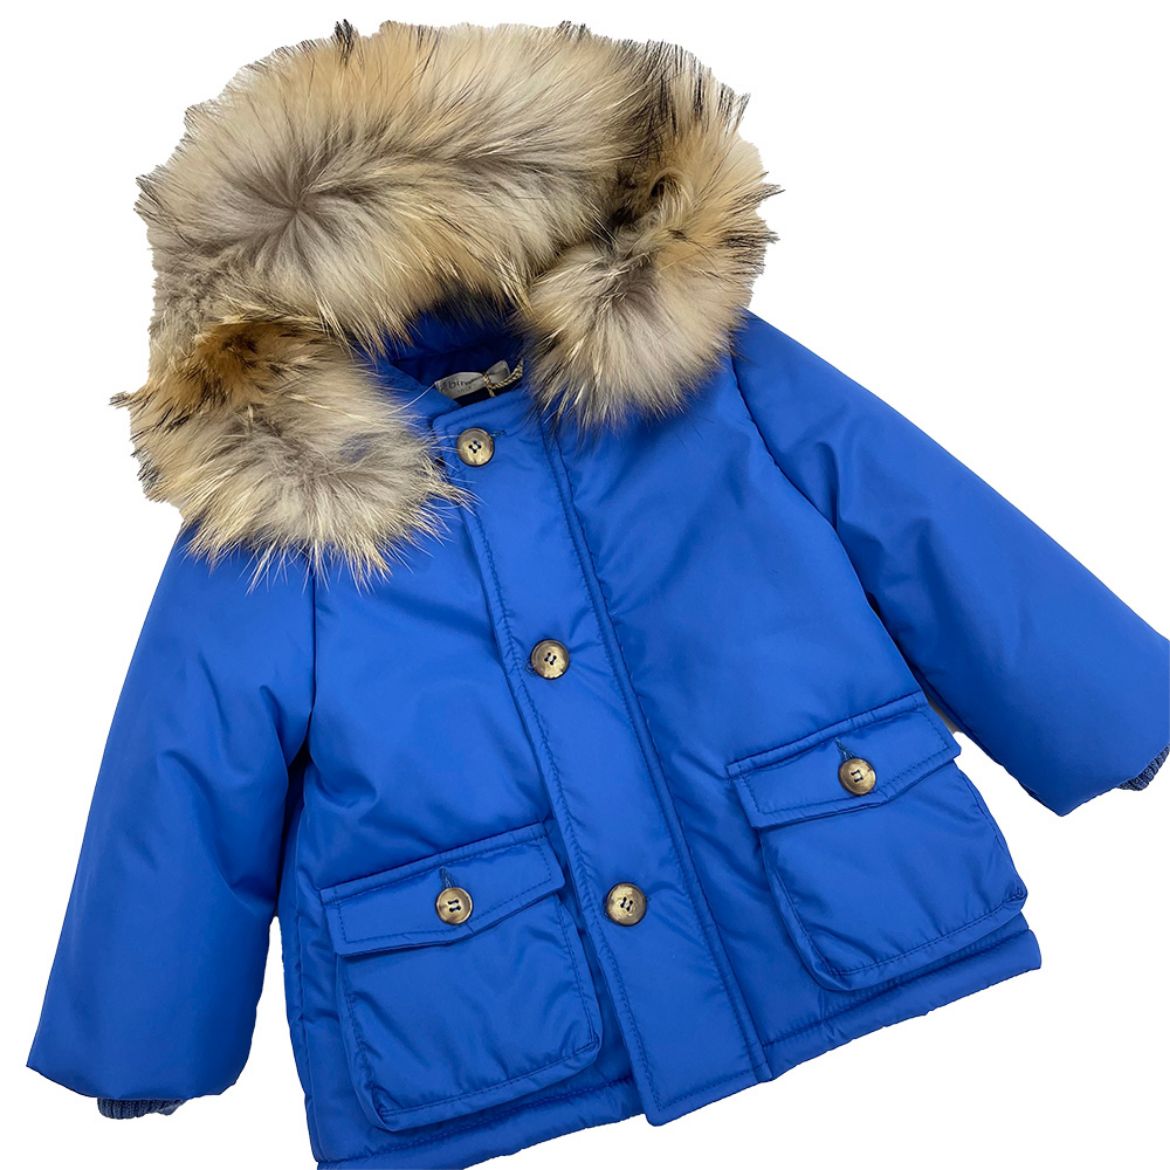 Picture of Bimbalo Boys Royal Blue Coat with Fur Hood